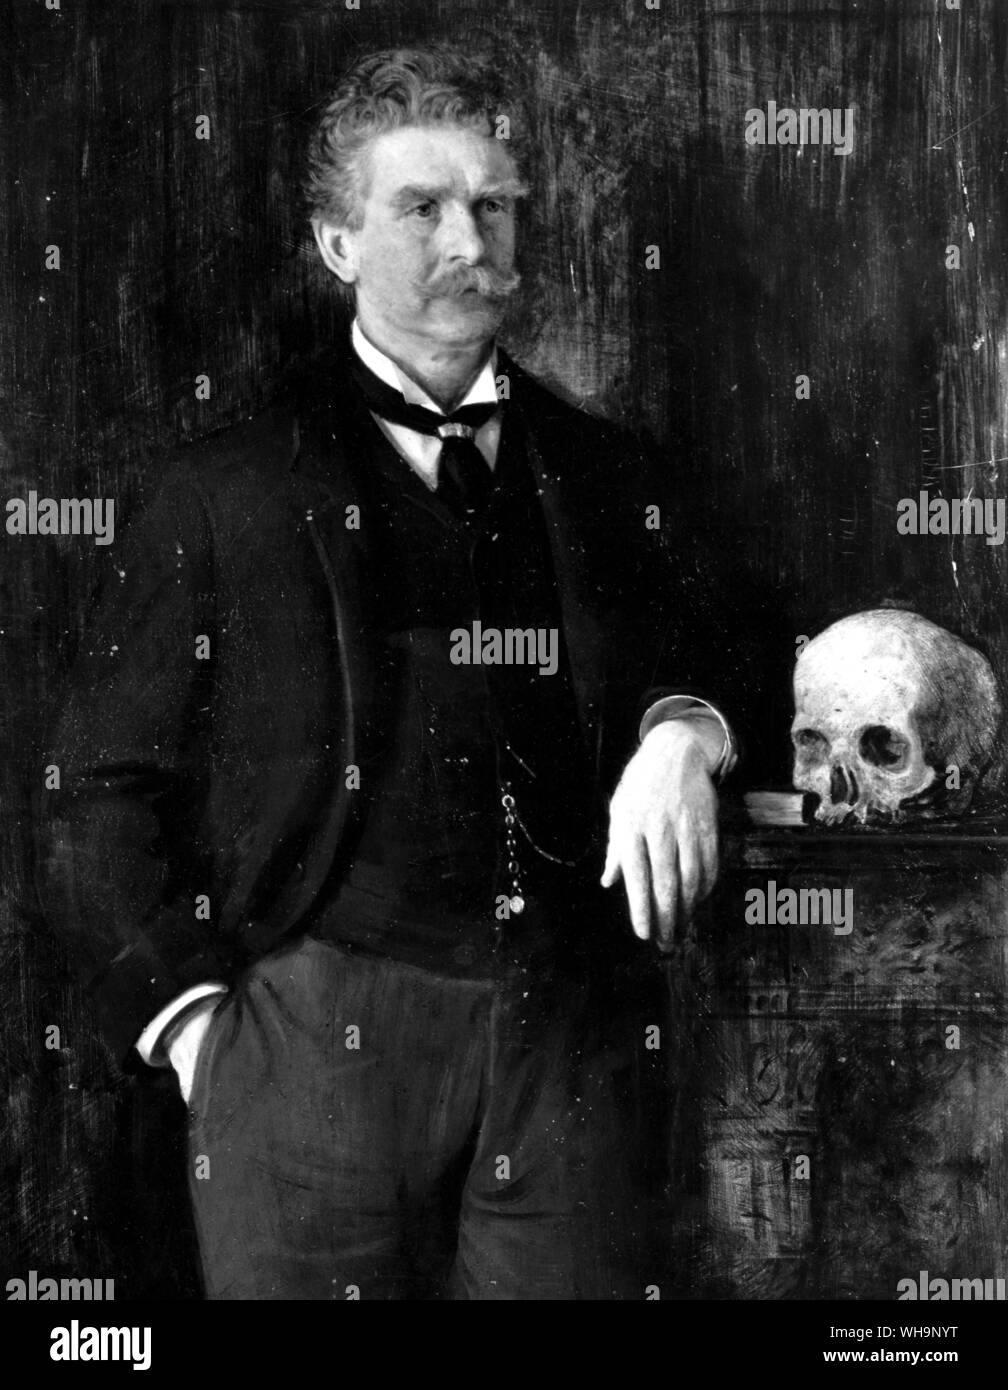 Ambrose Bierce, jurnalist, author, and celebrity of San Francisco's literary frontier, by J. H. E. Parkington - photo from Mark Twain's biography Stock Photo